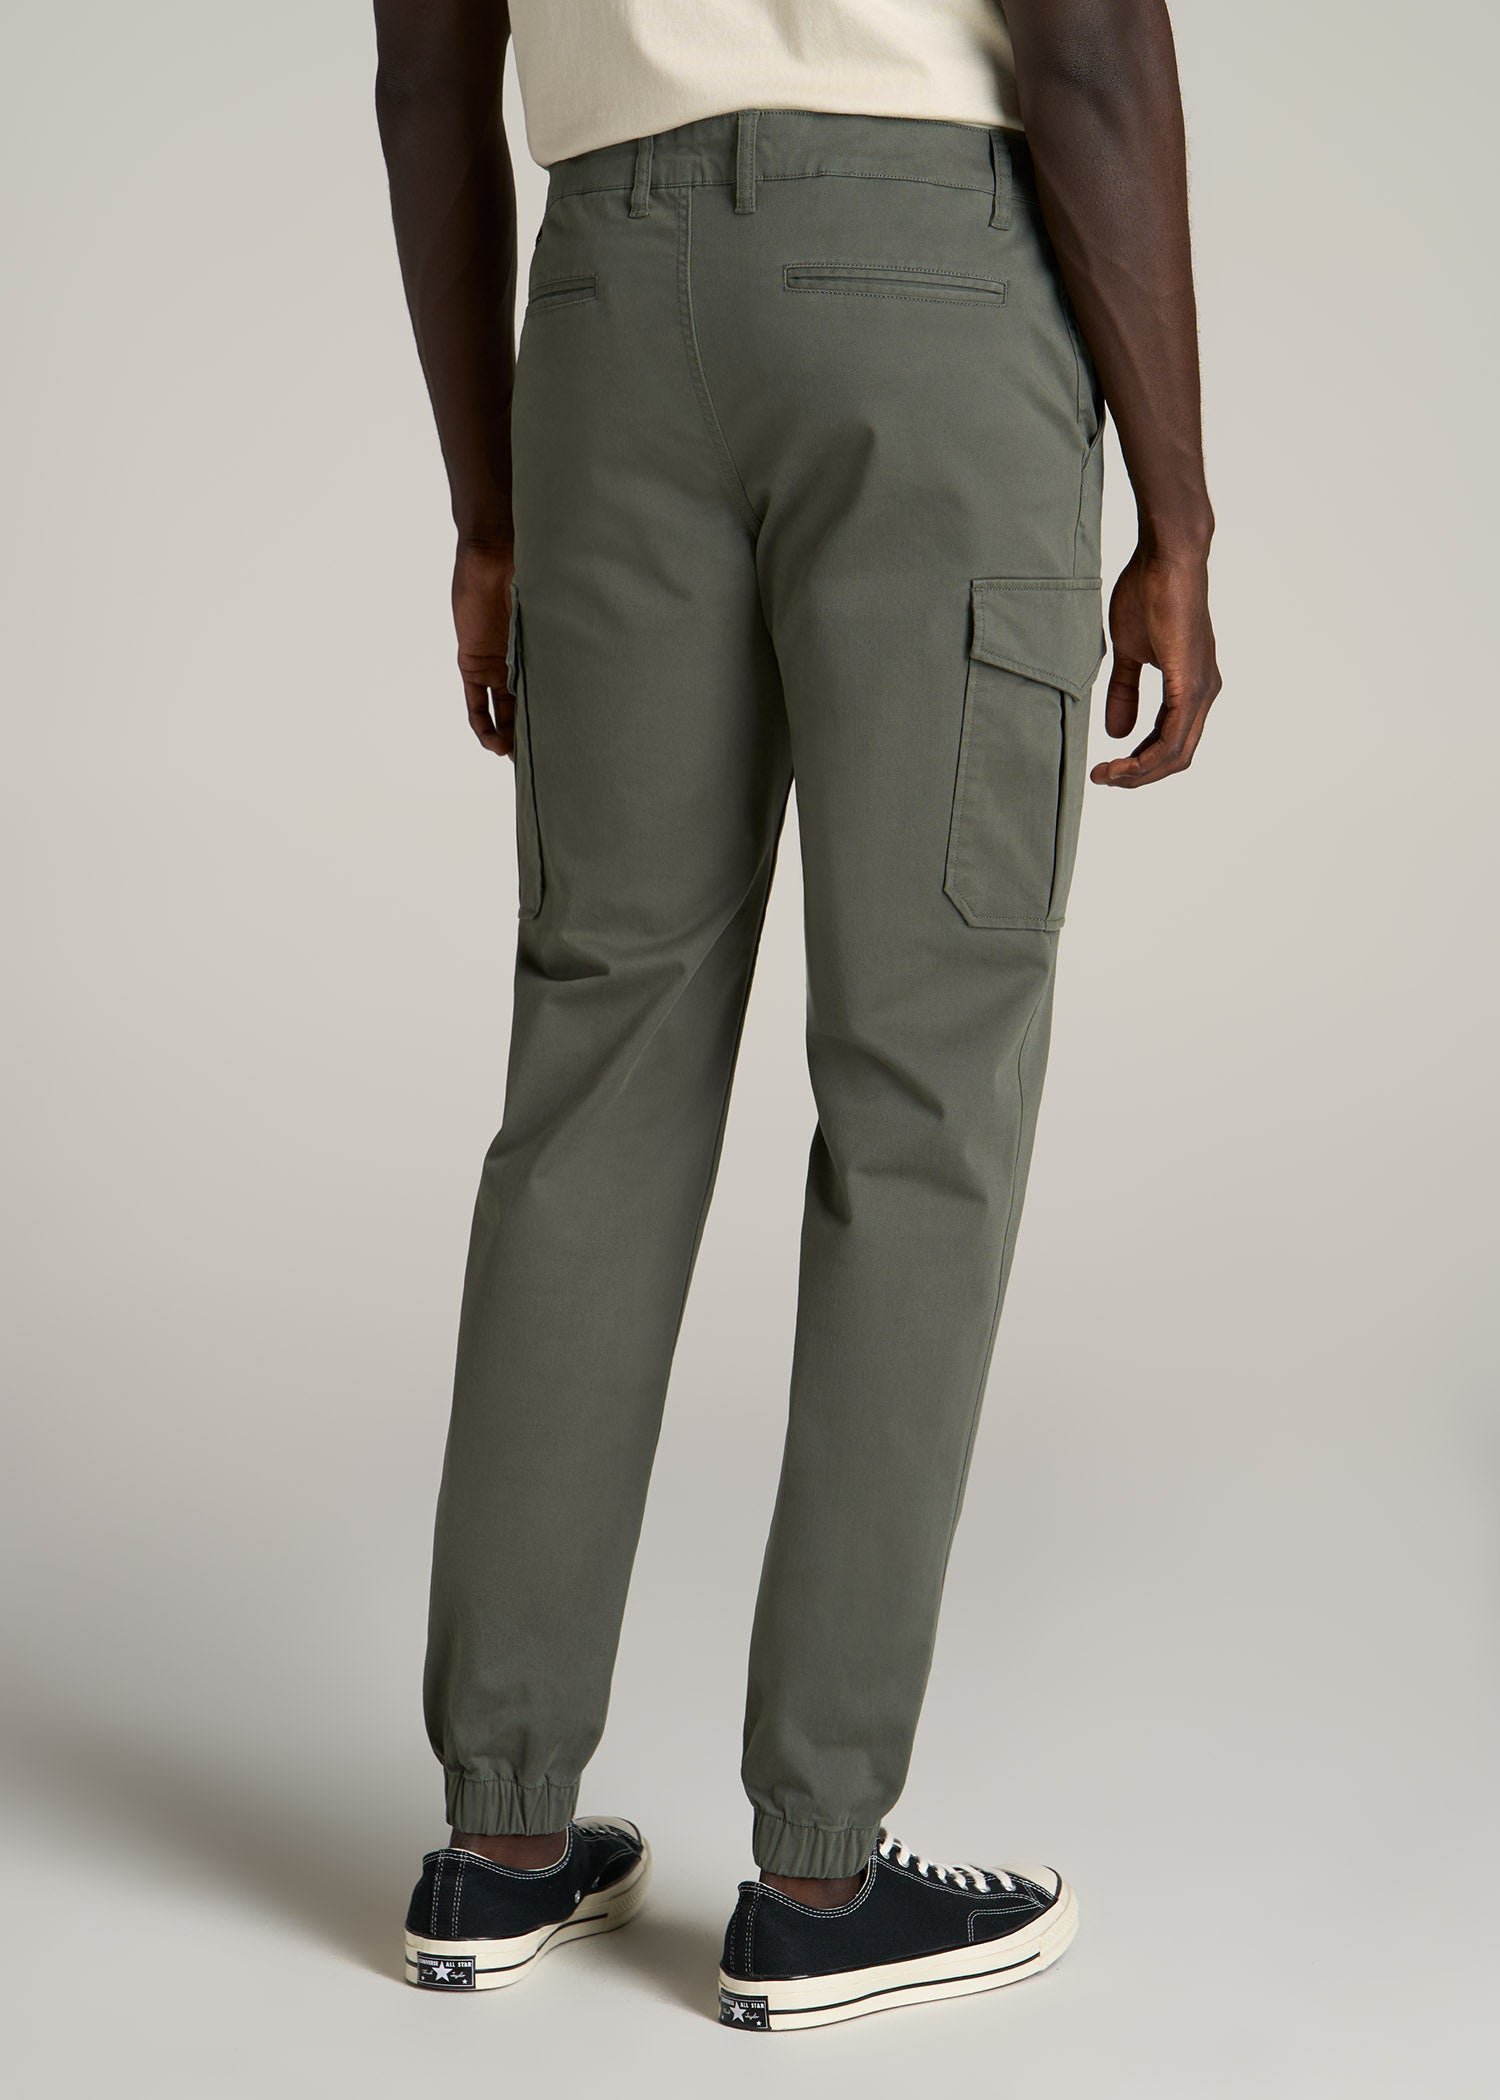 Tapered-Fit Stretch Cotton Cargo Jogger Pants for Tall Men in Spring Olive 28 / Tall / Spring Olive